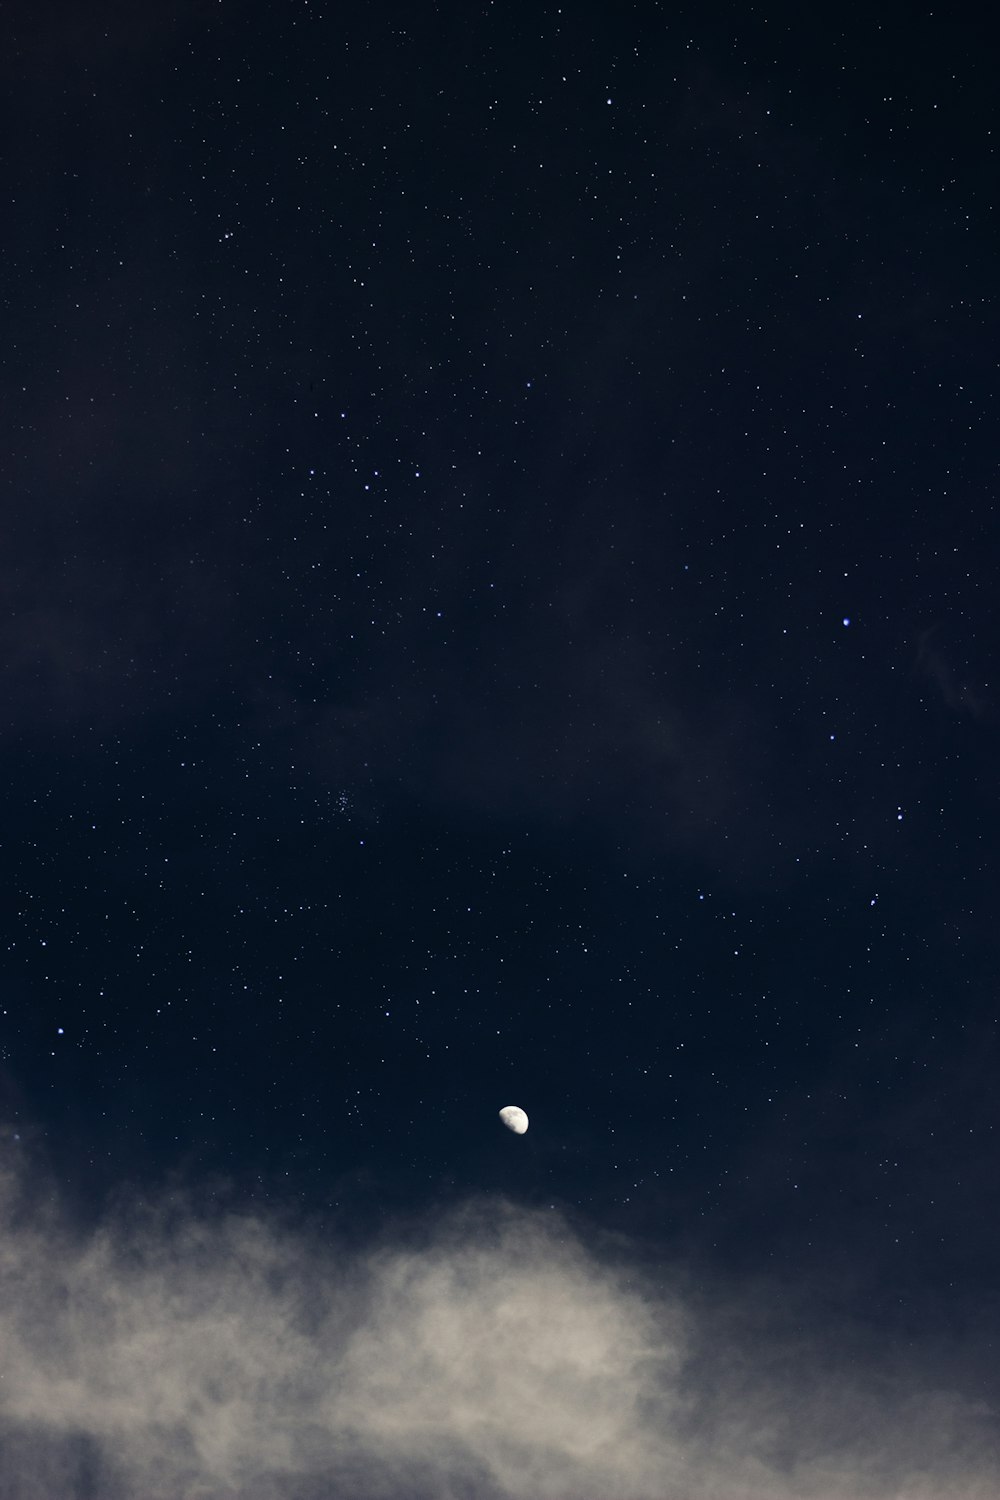 a night sky with the moon and stars